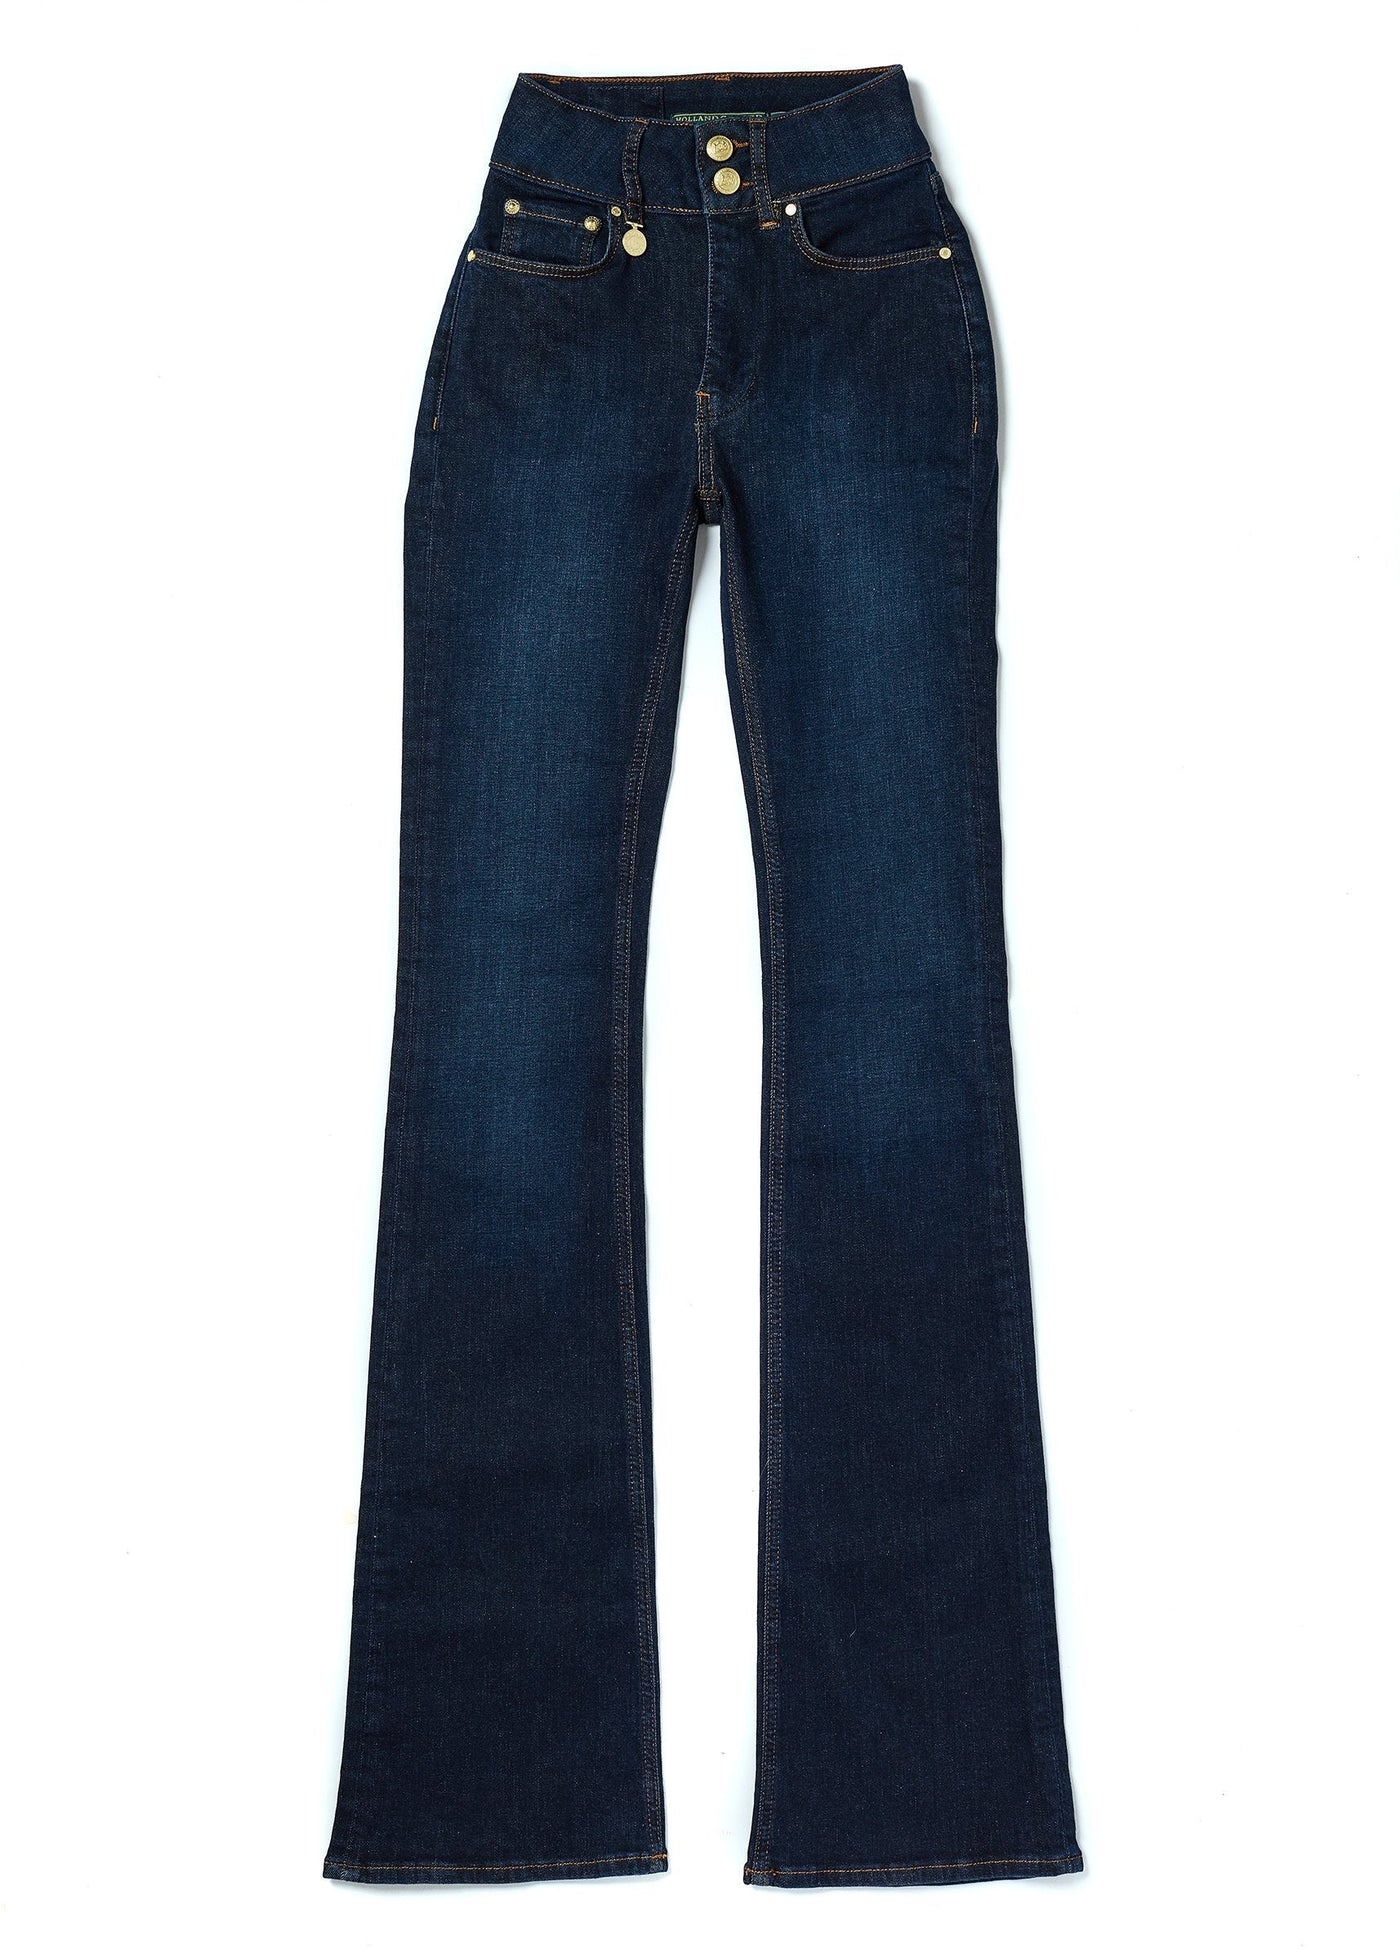 Holland Cooper High Rise Flared Jean in Deep Indigo Front